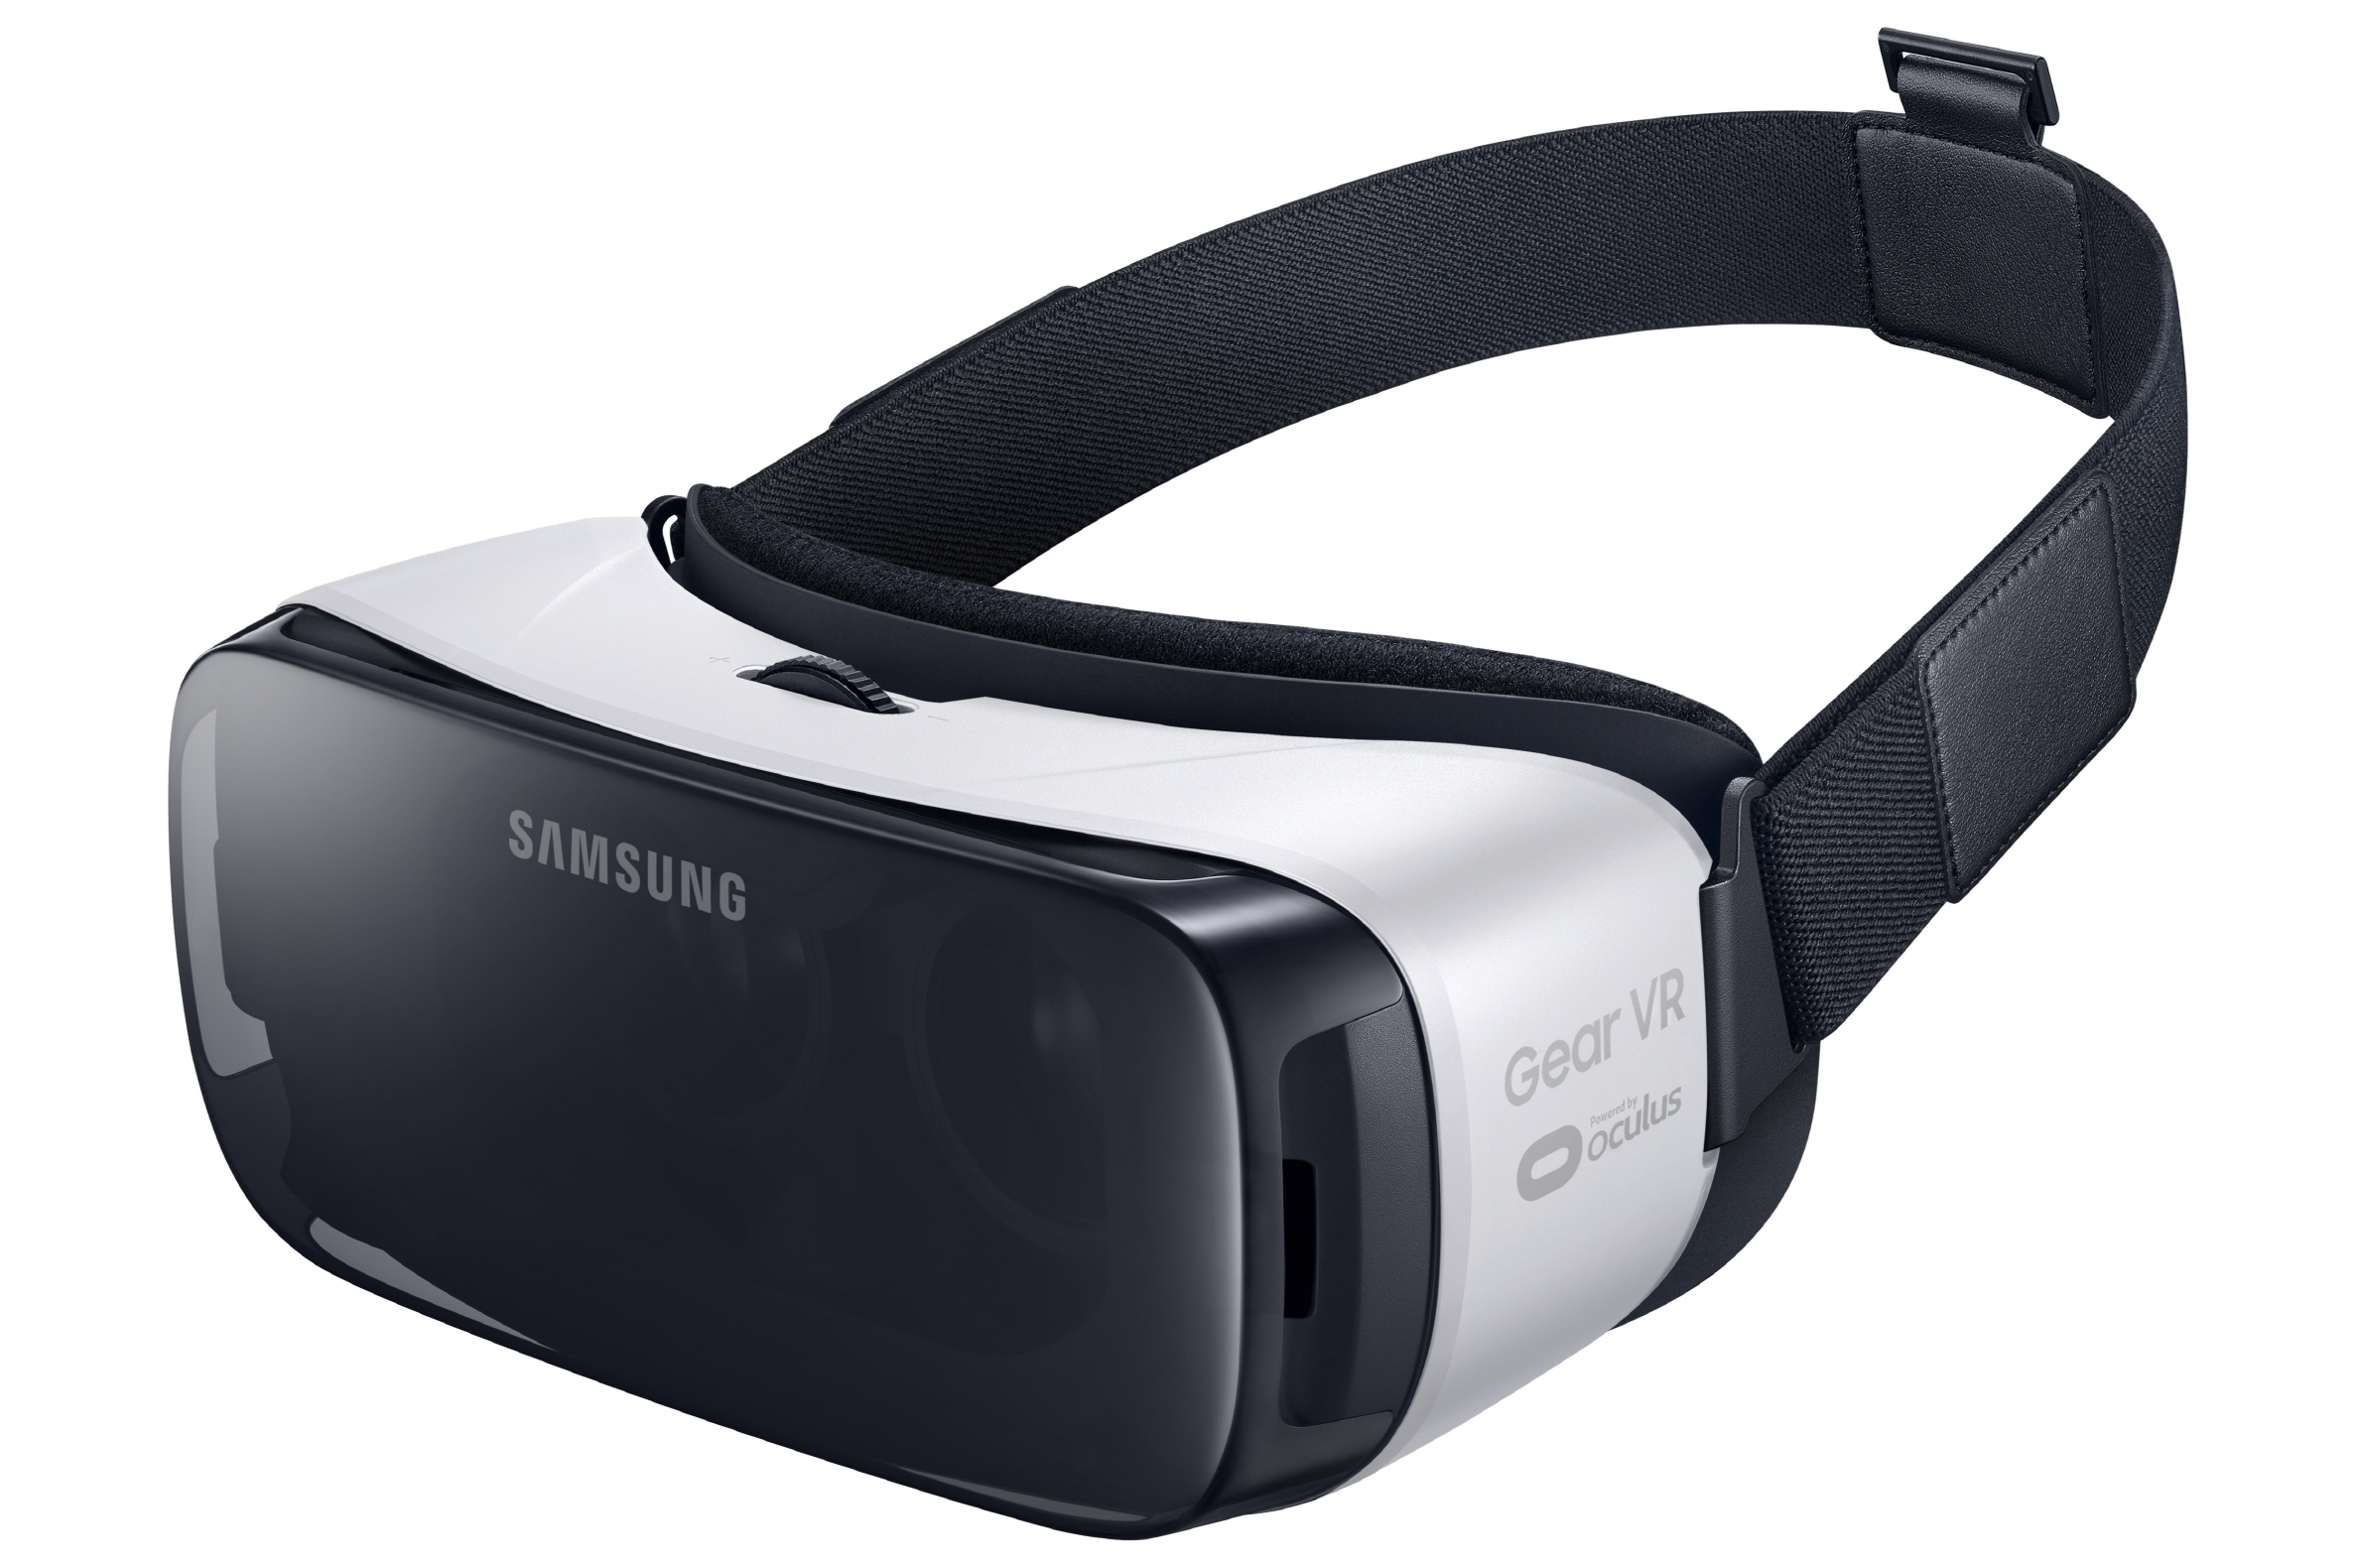 The Gear VR by Samsung